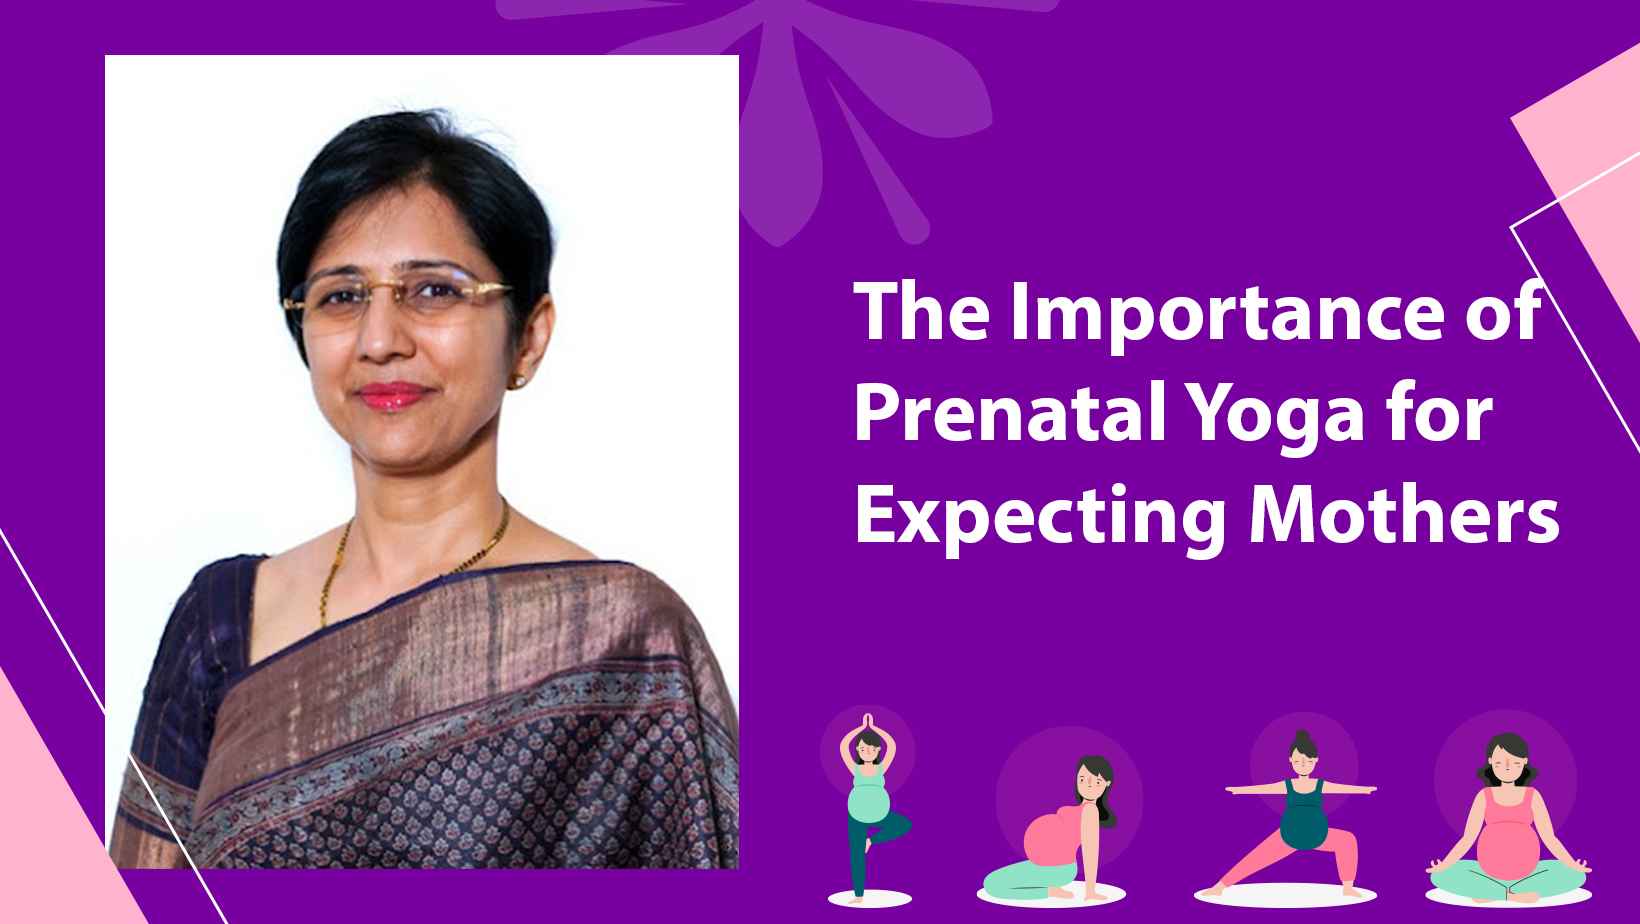 You are currently viewing The Importance of Prenatal Yoga for Expecting Mothers